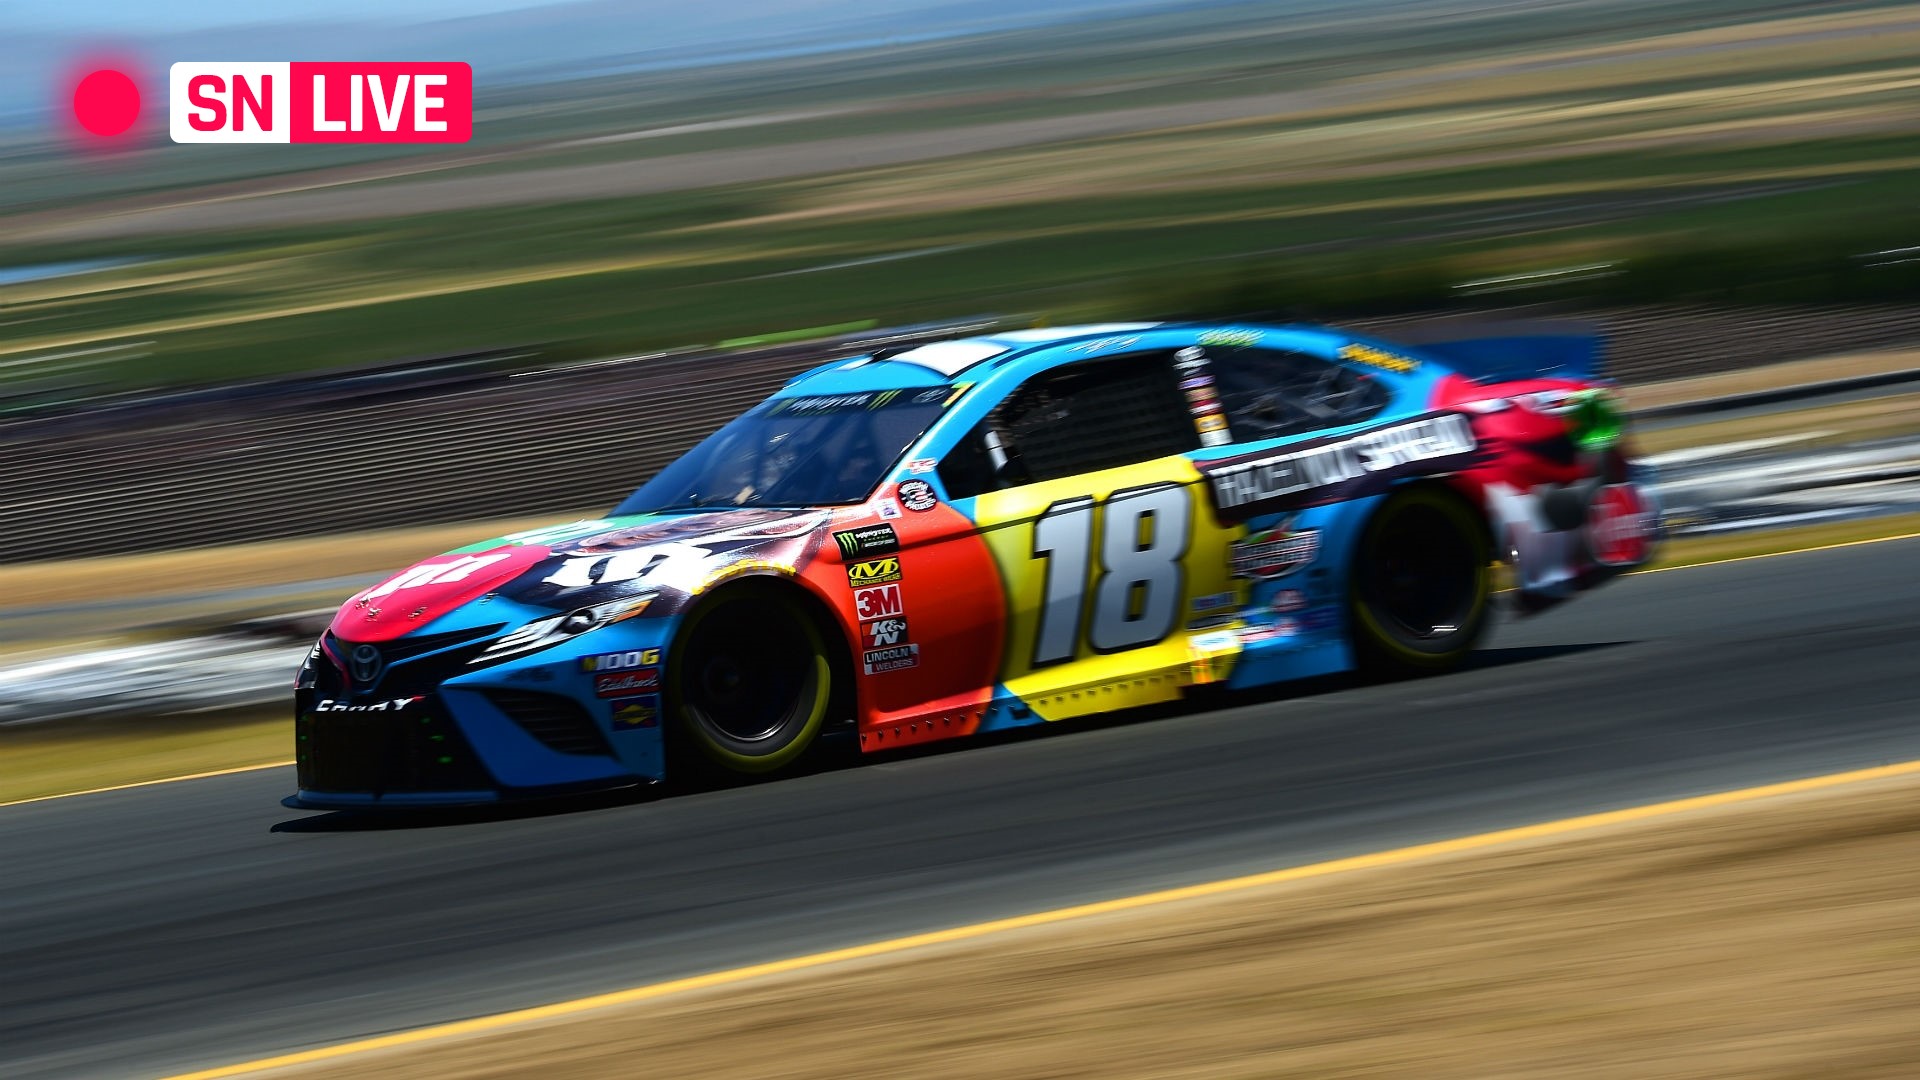 NASCAR at Sonoma: Live updates, results, highlights from Toyota/Save Mart 350